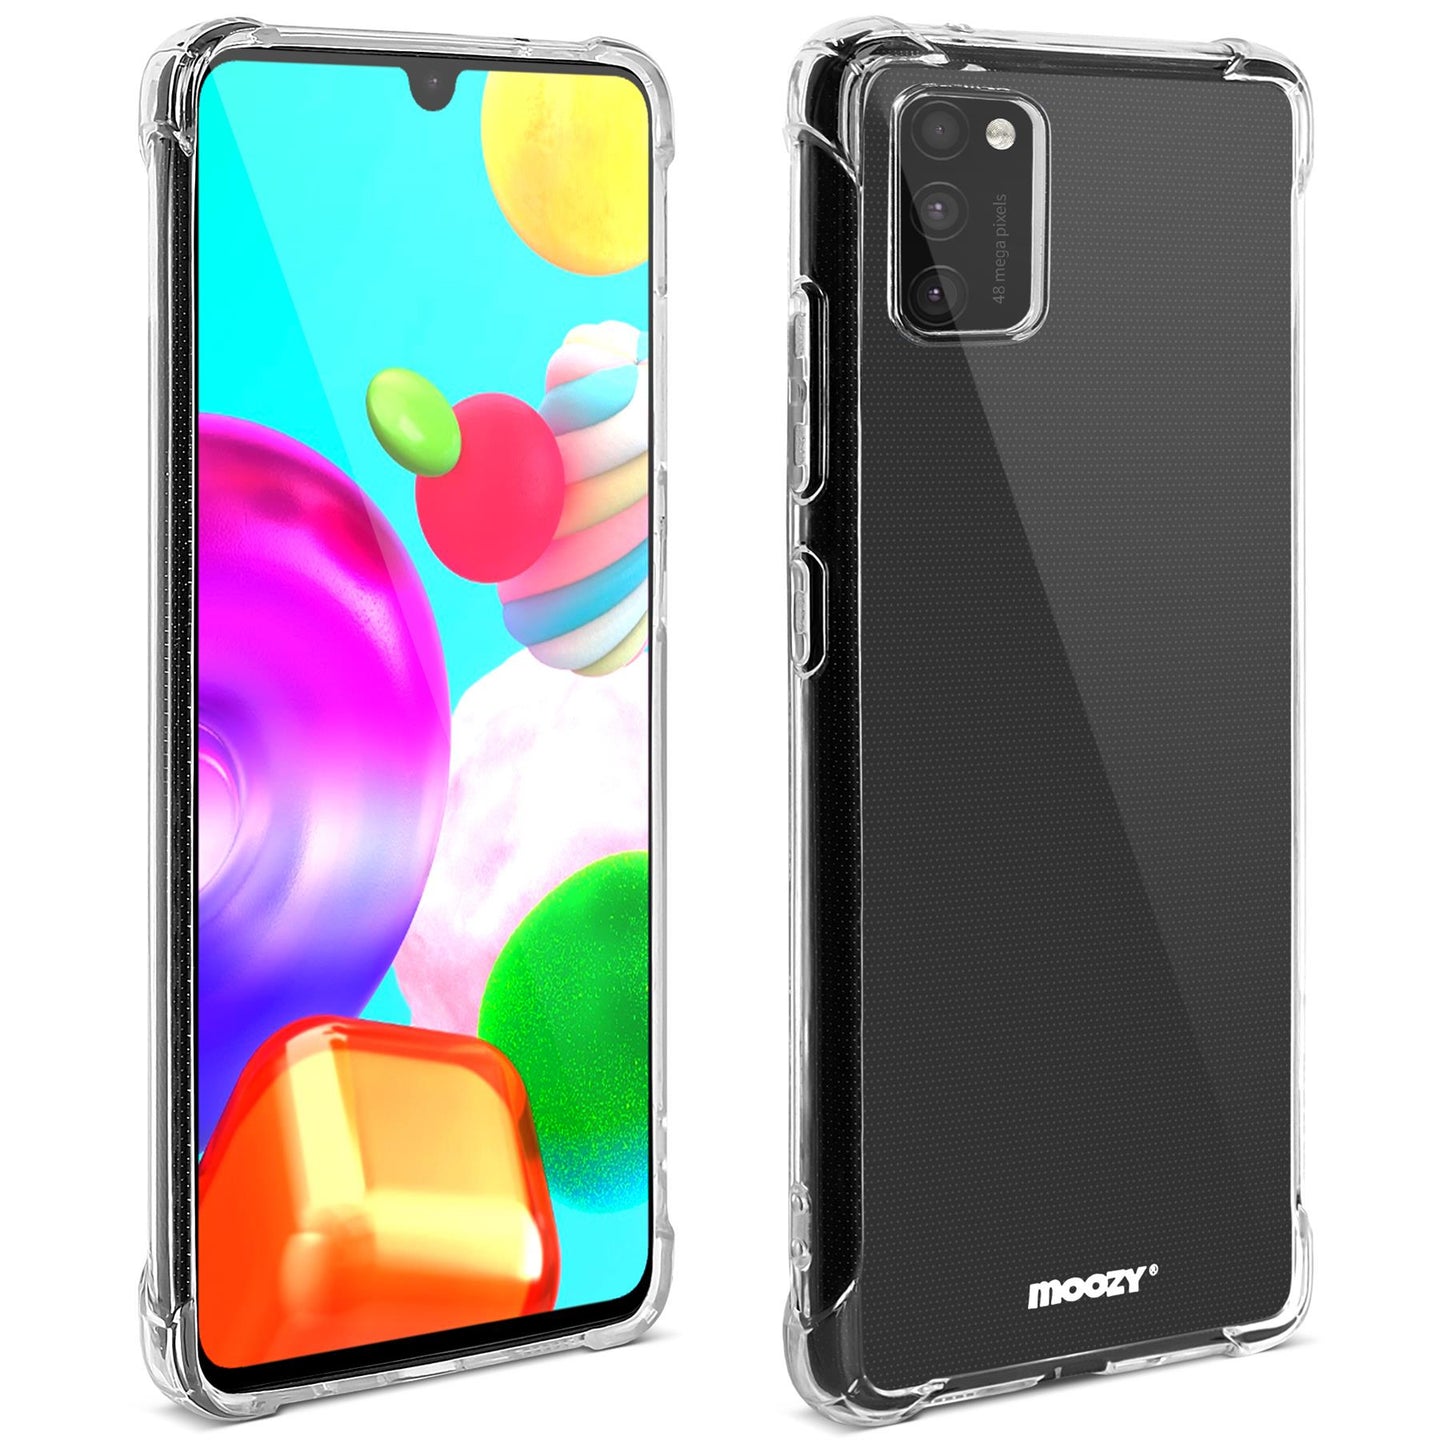 Moozy Shock Proof Silicone Case for Samsung A41 - Transparent Crystal Clear Phone Case Soft TPU Cover